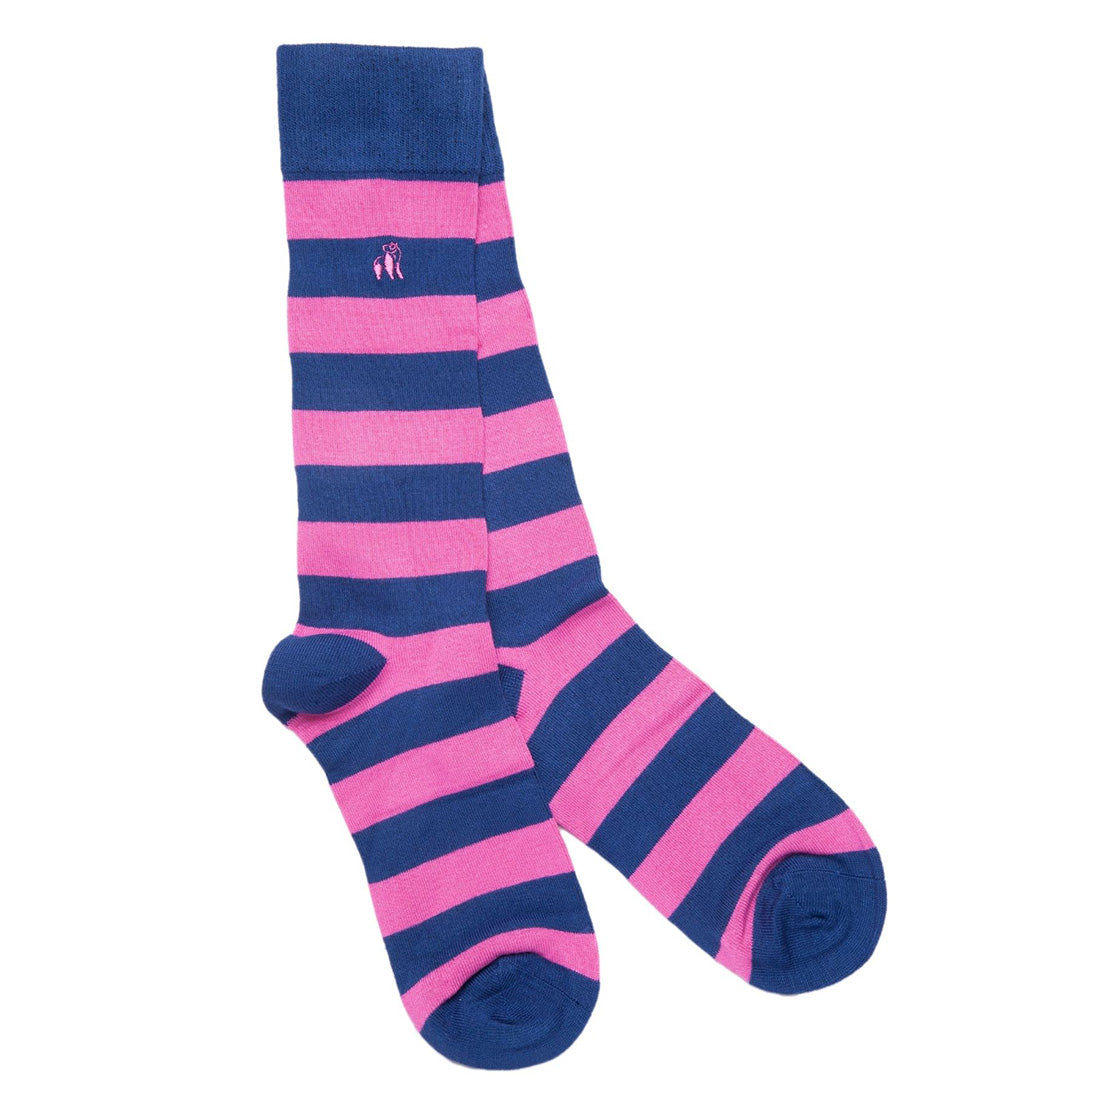 Striped Bamboo Sock Bundle - Four Pairs